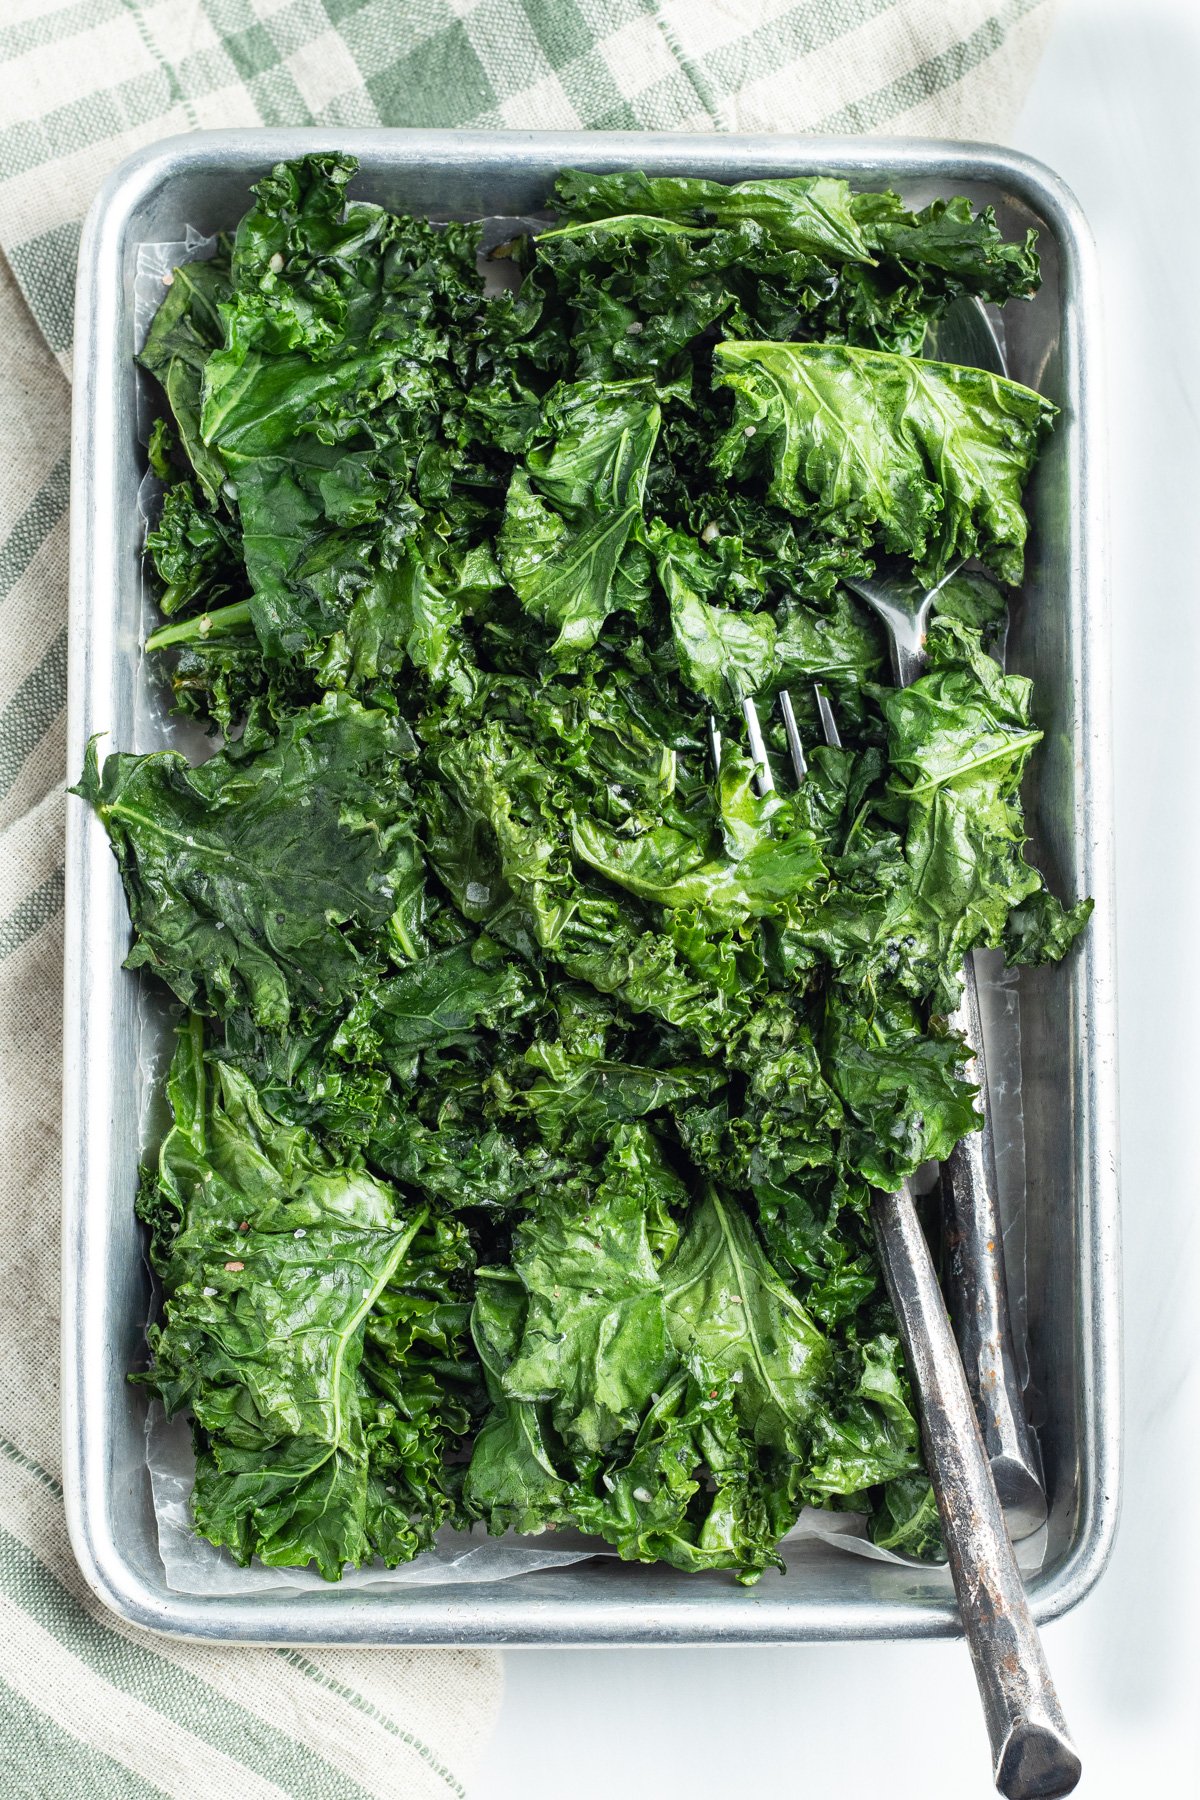 Overhead view of a large sheet pan holding leaves of bright green roasted kale on a neutral tablecloth.